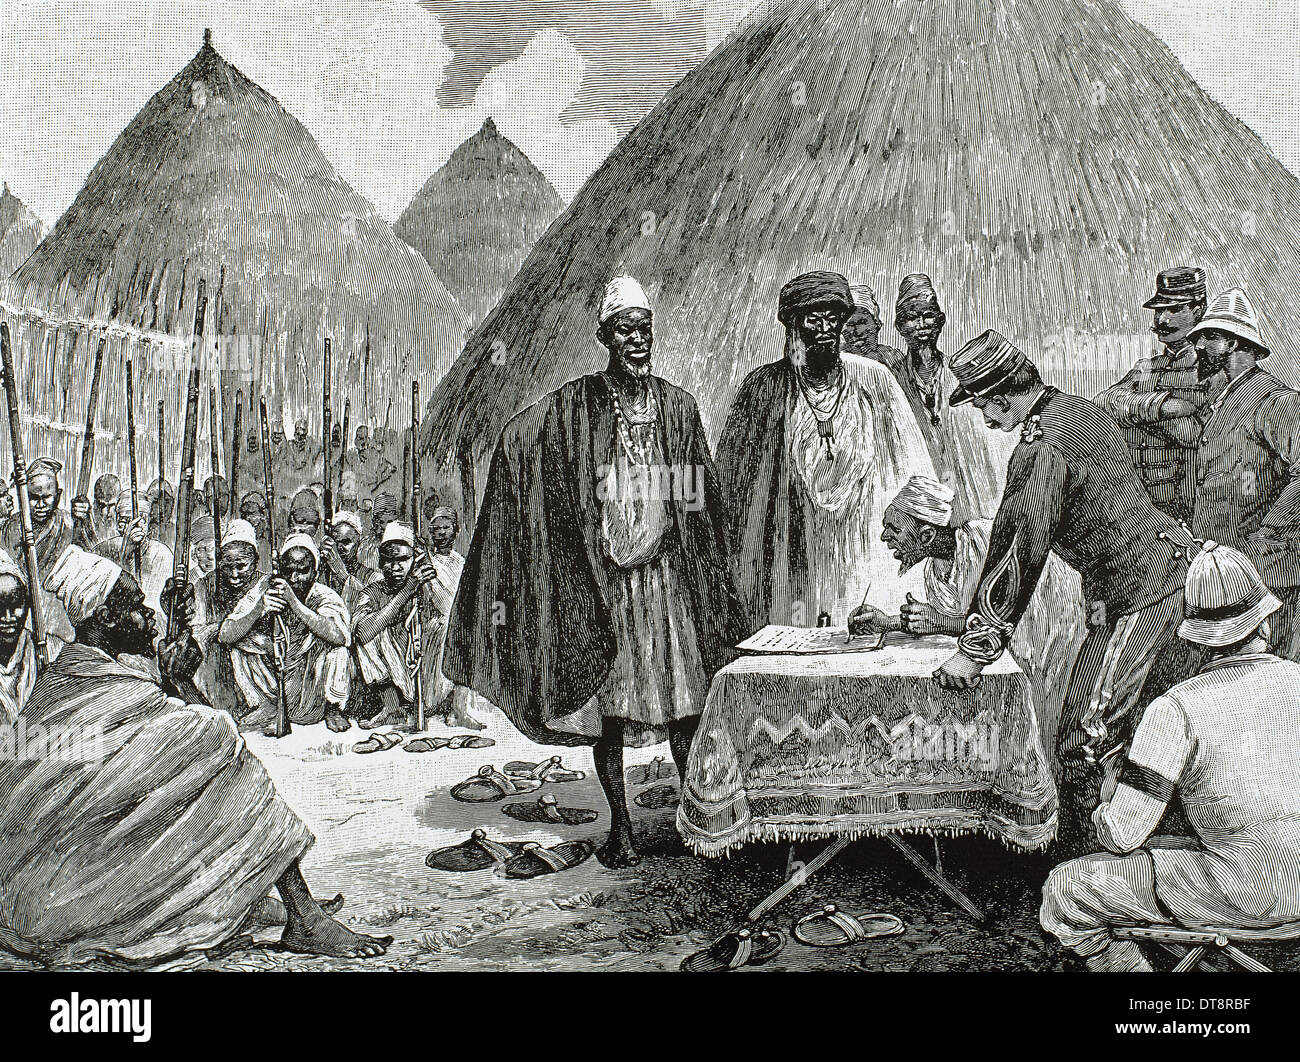 Africa. Signing a treaty between French colonists and the heads of the Kingdom of Tamisso. Engraving, 1892. Stock Photo